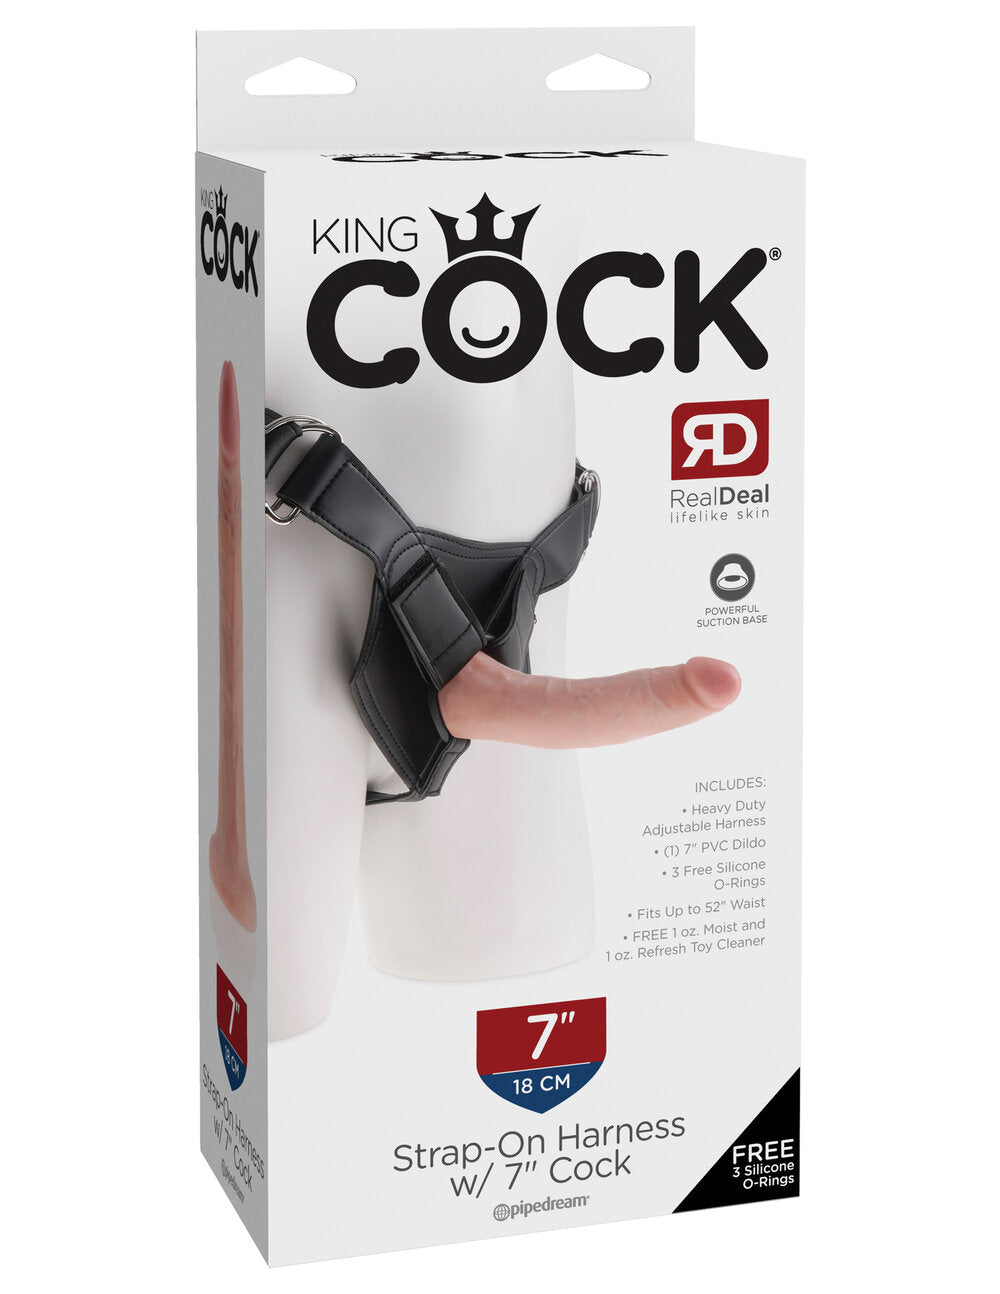 King Cock Strap On Harness w/7in Cock